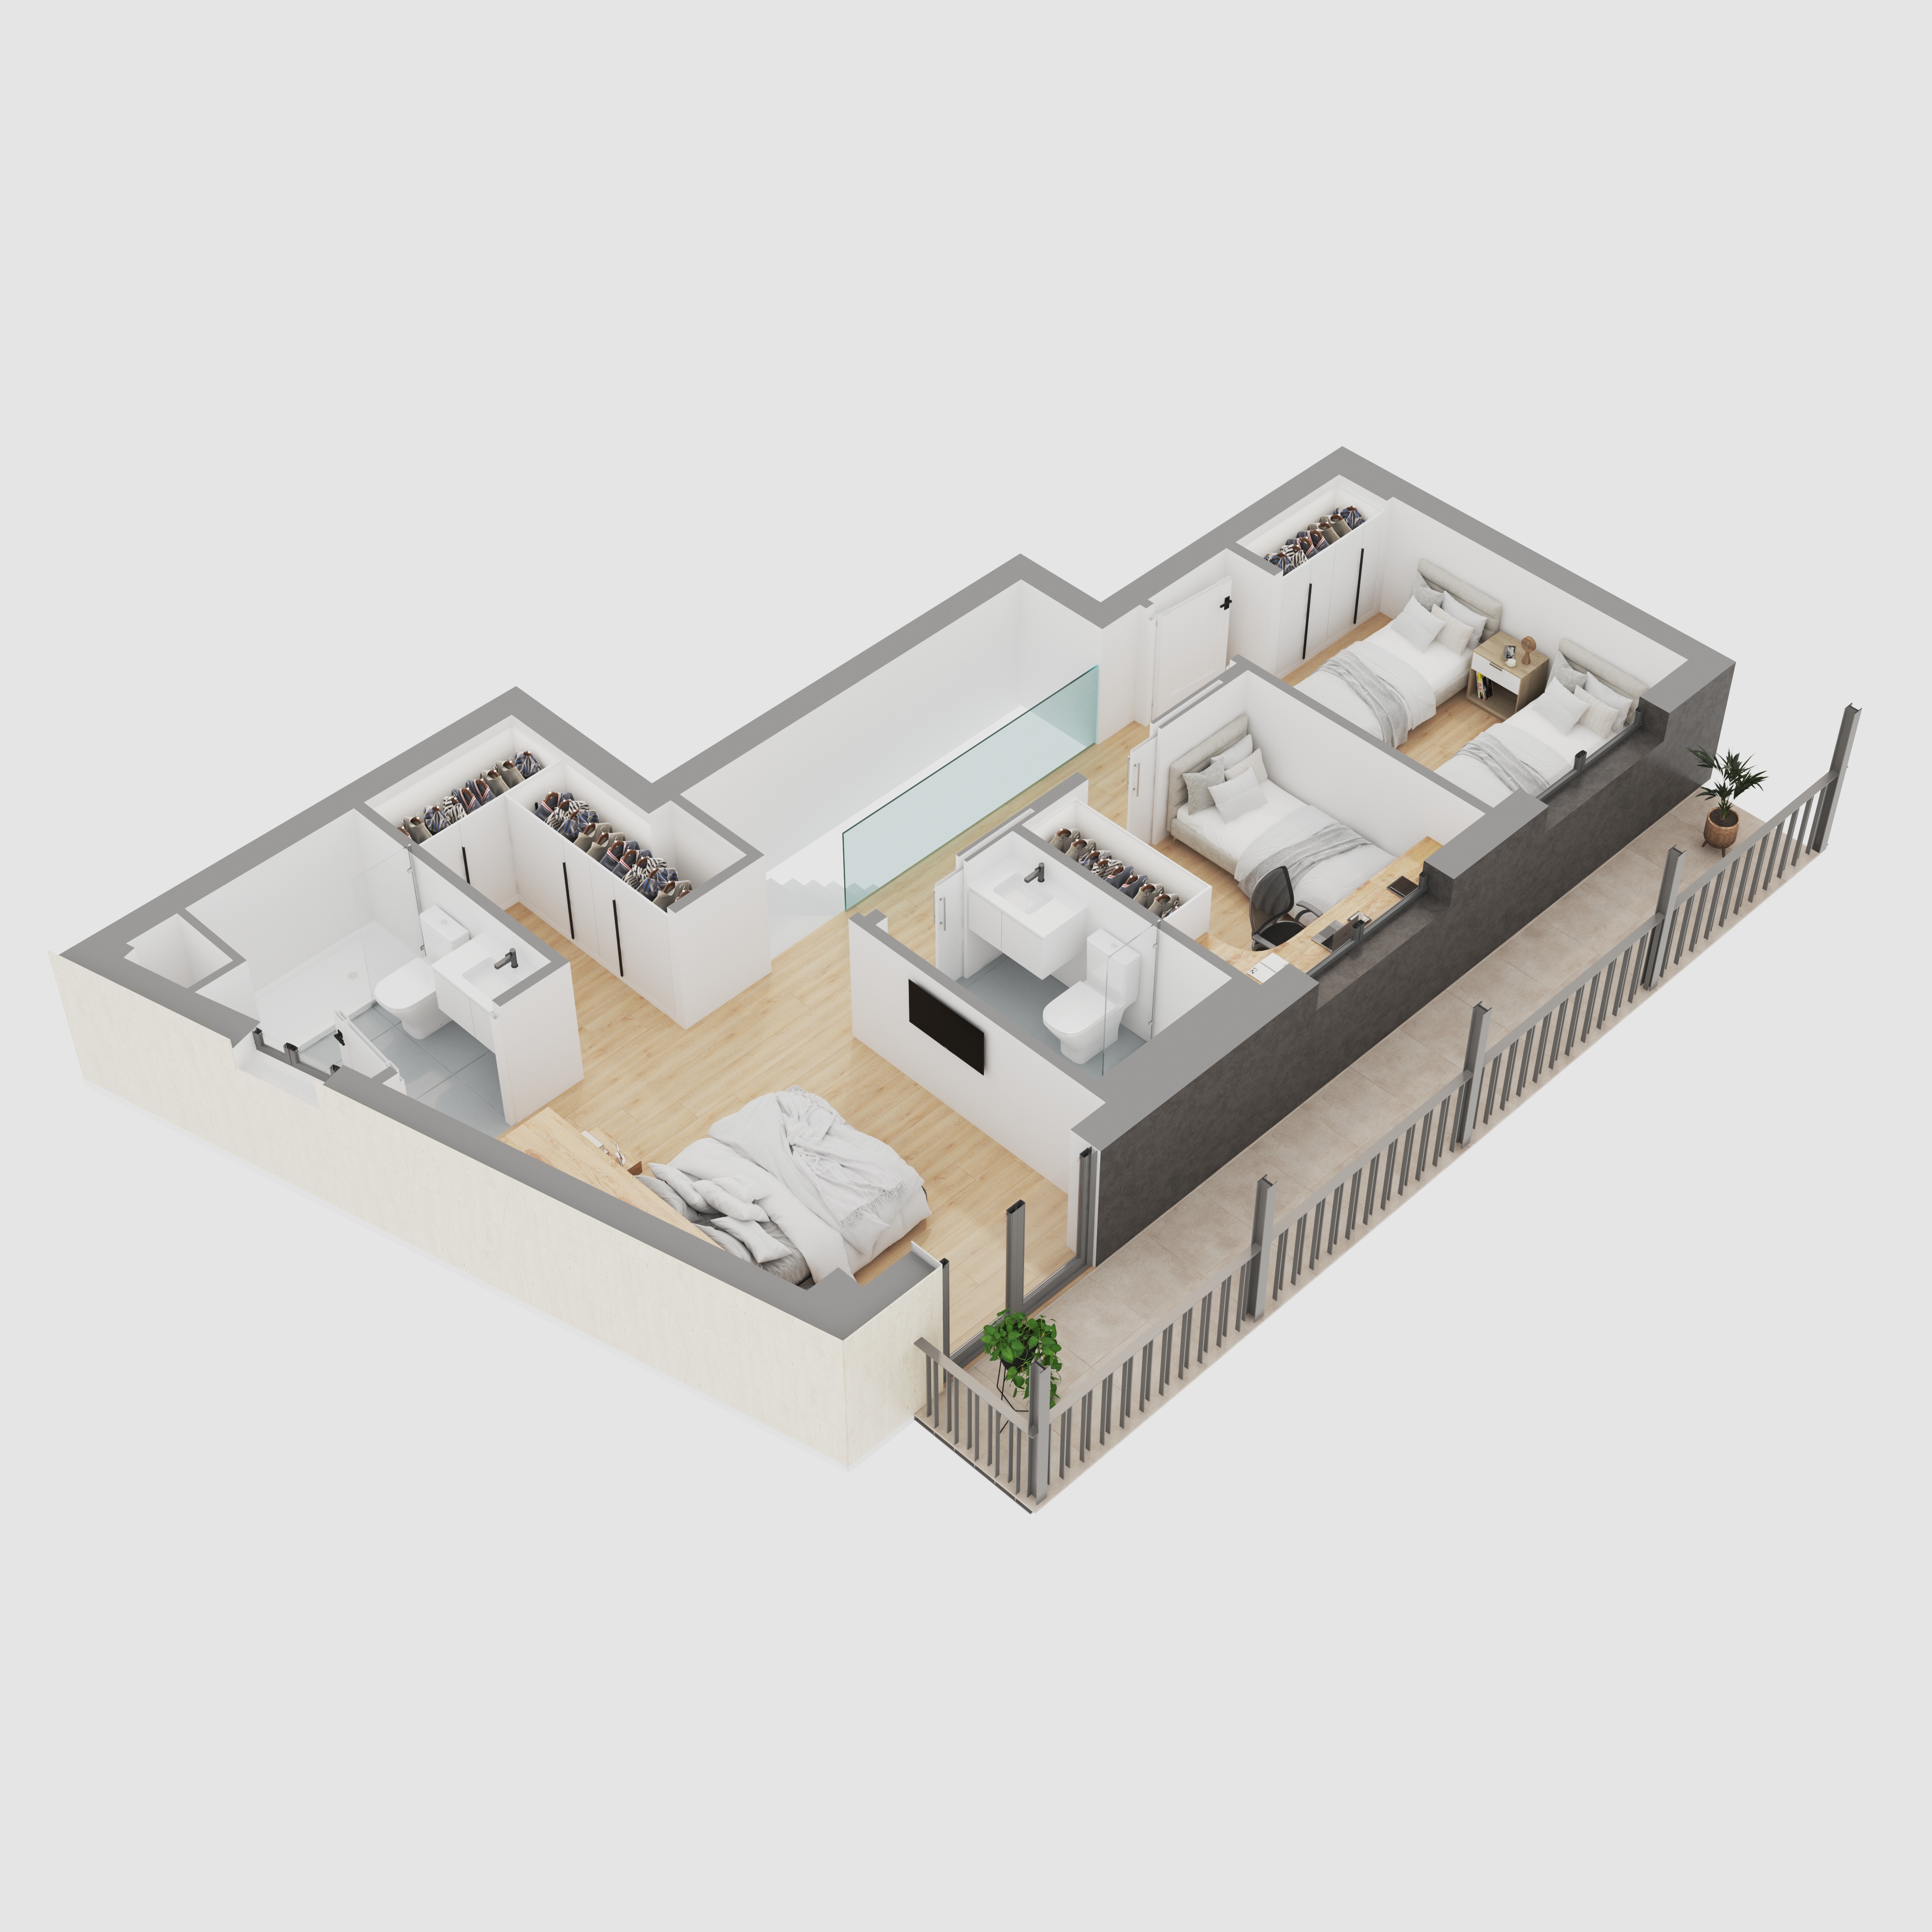 3d model rendering of house in italy with three bedrooms, balcony and high quality finishes for architecture company